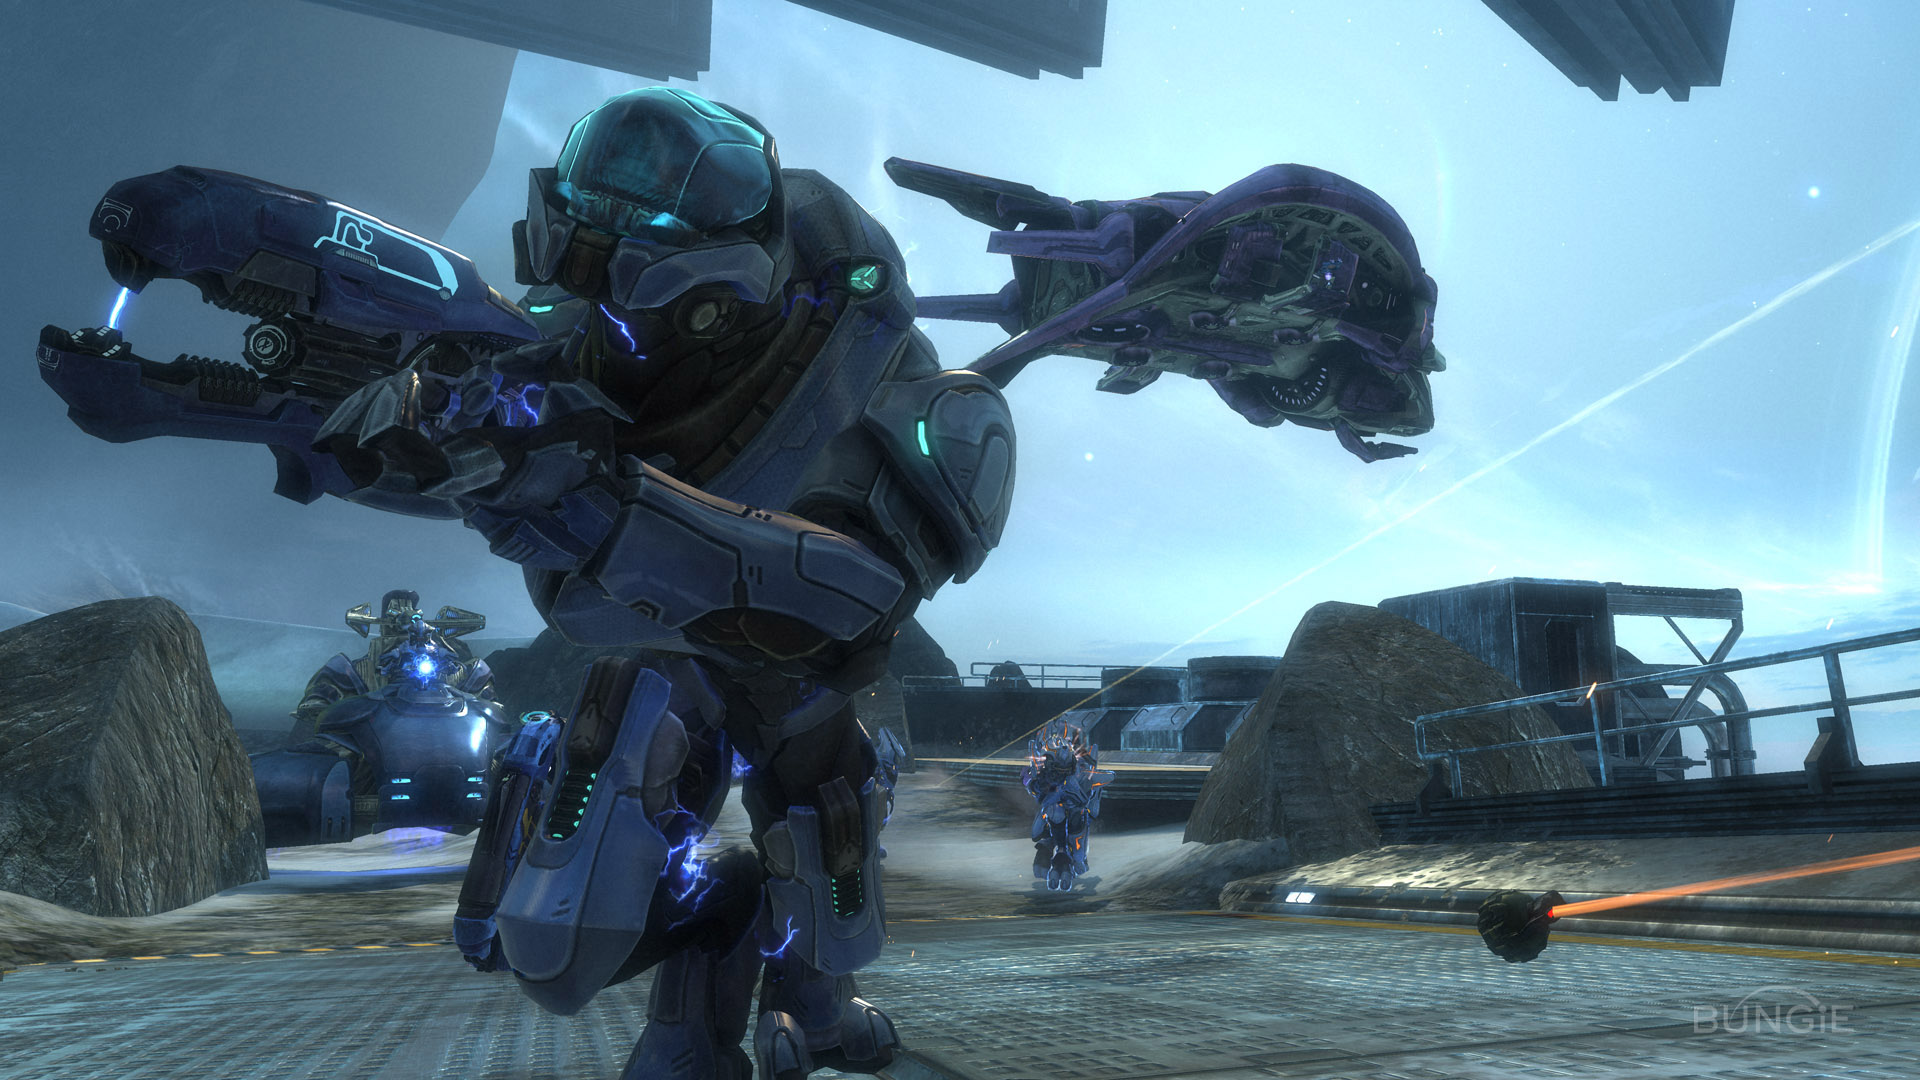 Halo Reach Noble Map Pack screenshots.